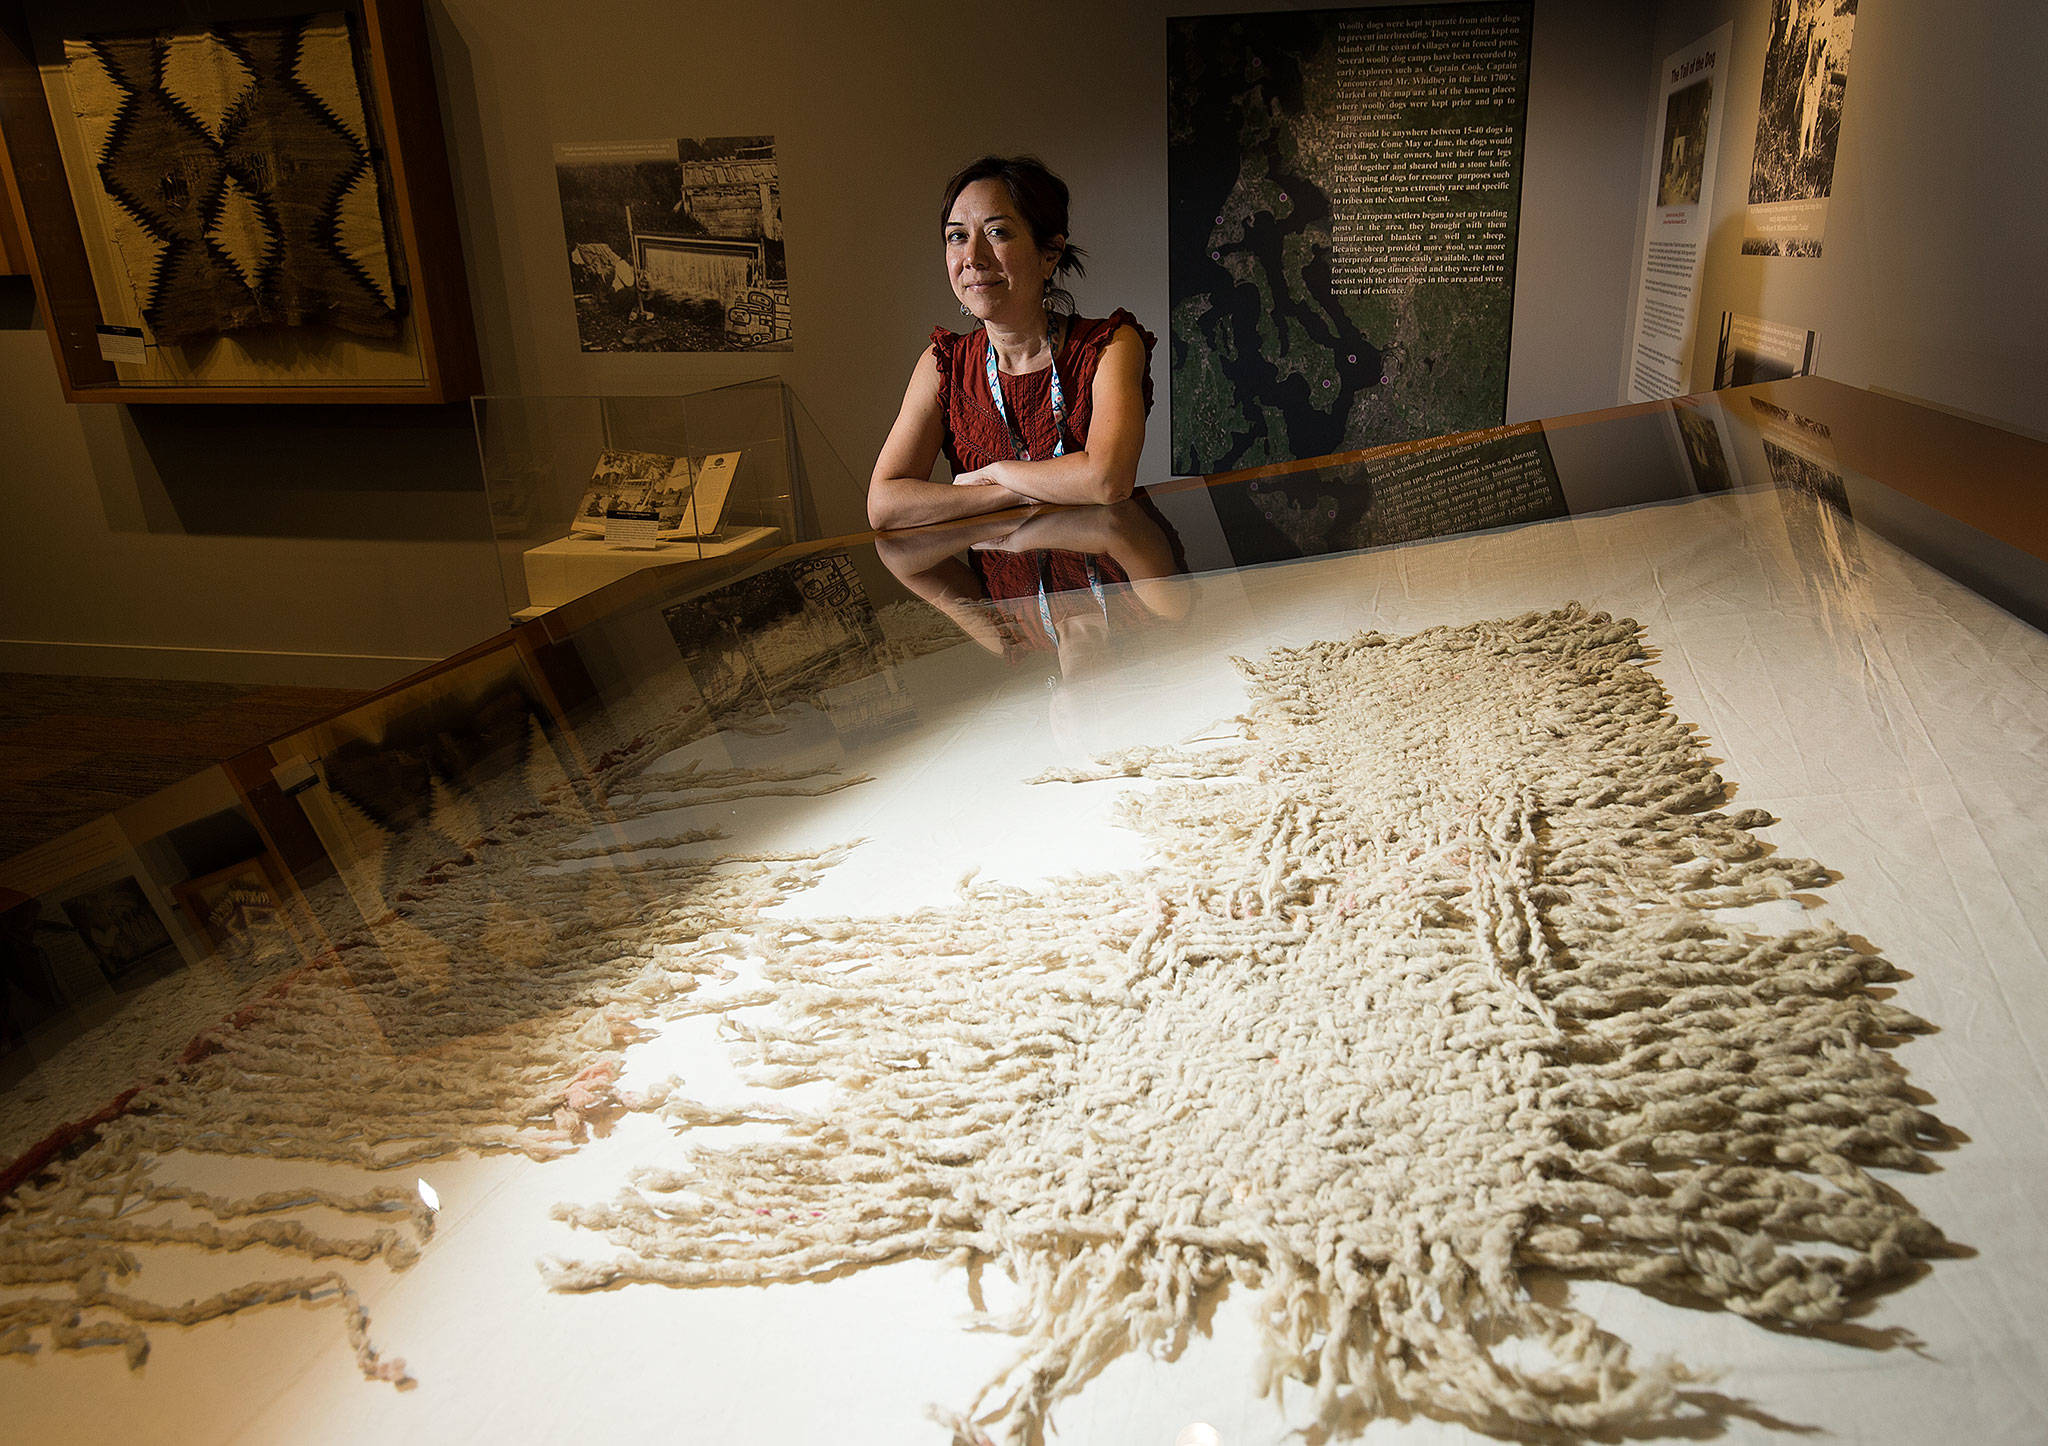 Senior curator Tessa Campbell with a rare example of a blanket made from woolly dog hair and mountain goat hair at the Hibulb Cultural Center in Tulalip. The blanket is part of the current exhibit “Interwoven History, Coast Salish Wool.” (Andy Bronson / The Herald)